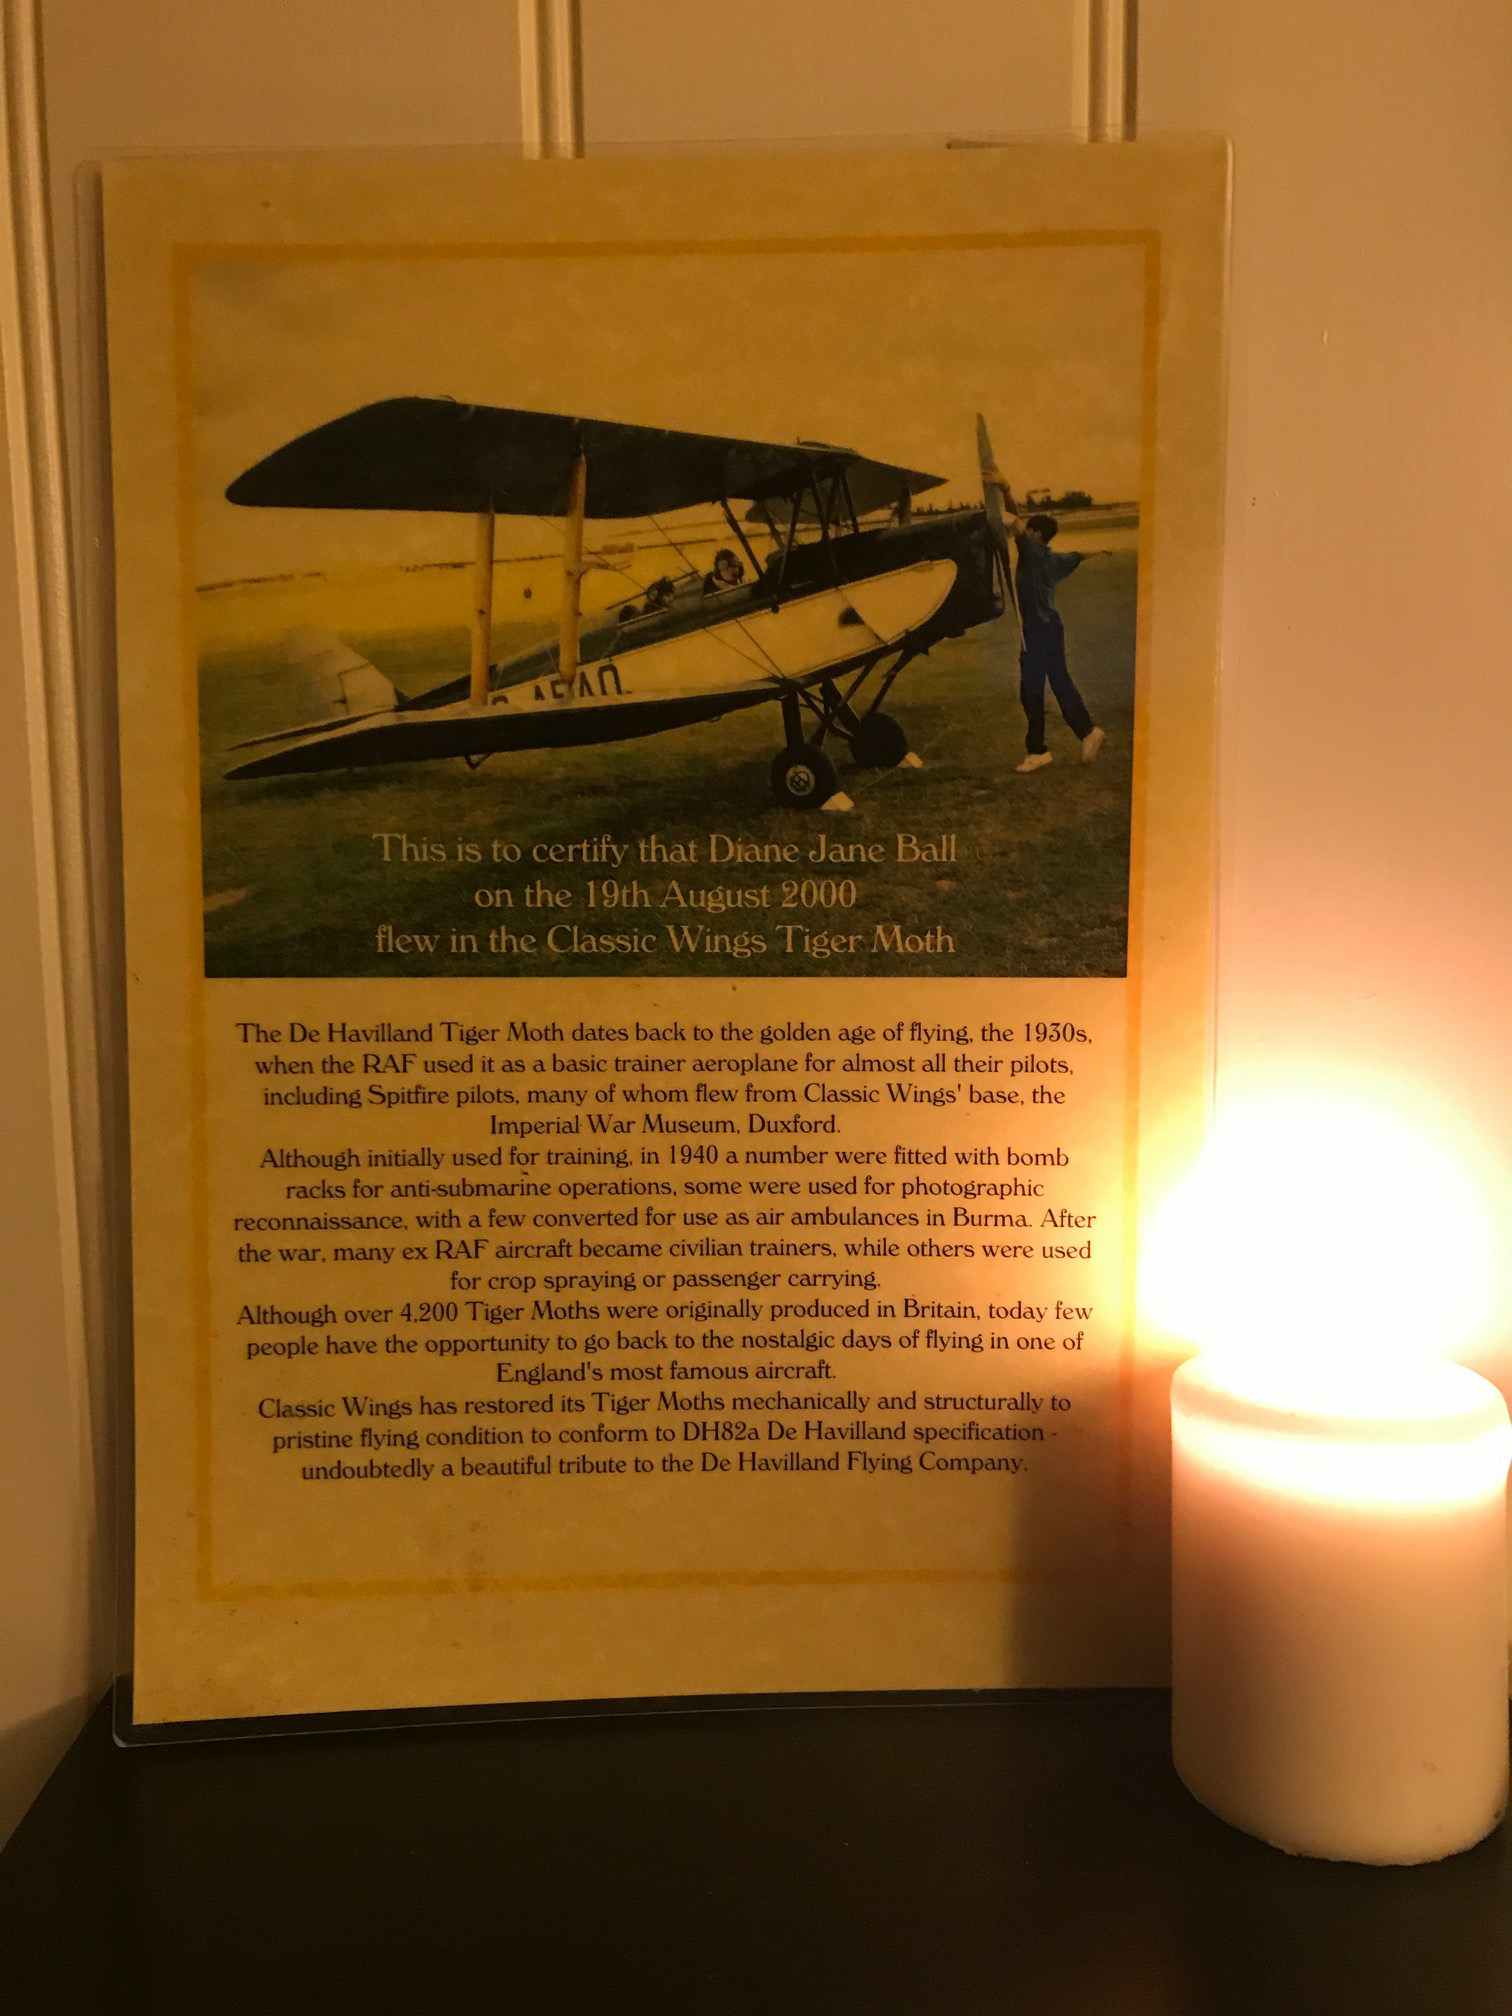 Croydon Airport: Lighting a candle for Diddley.